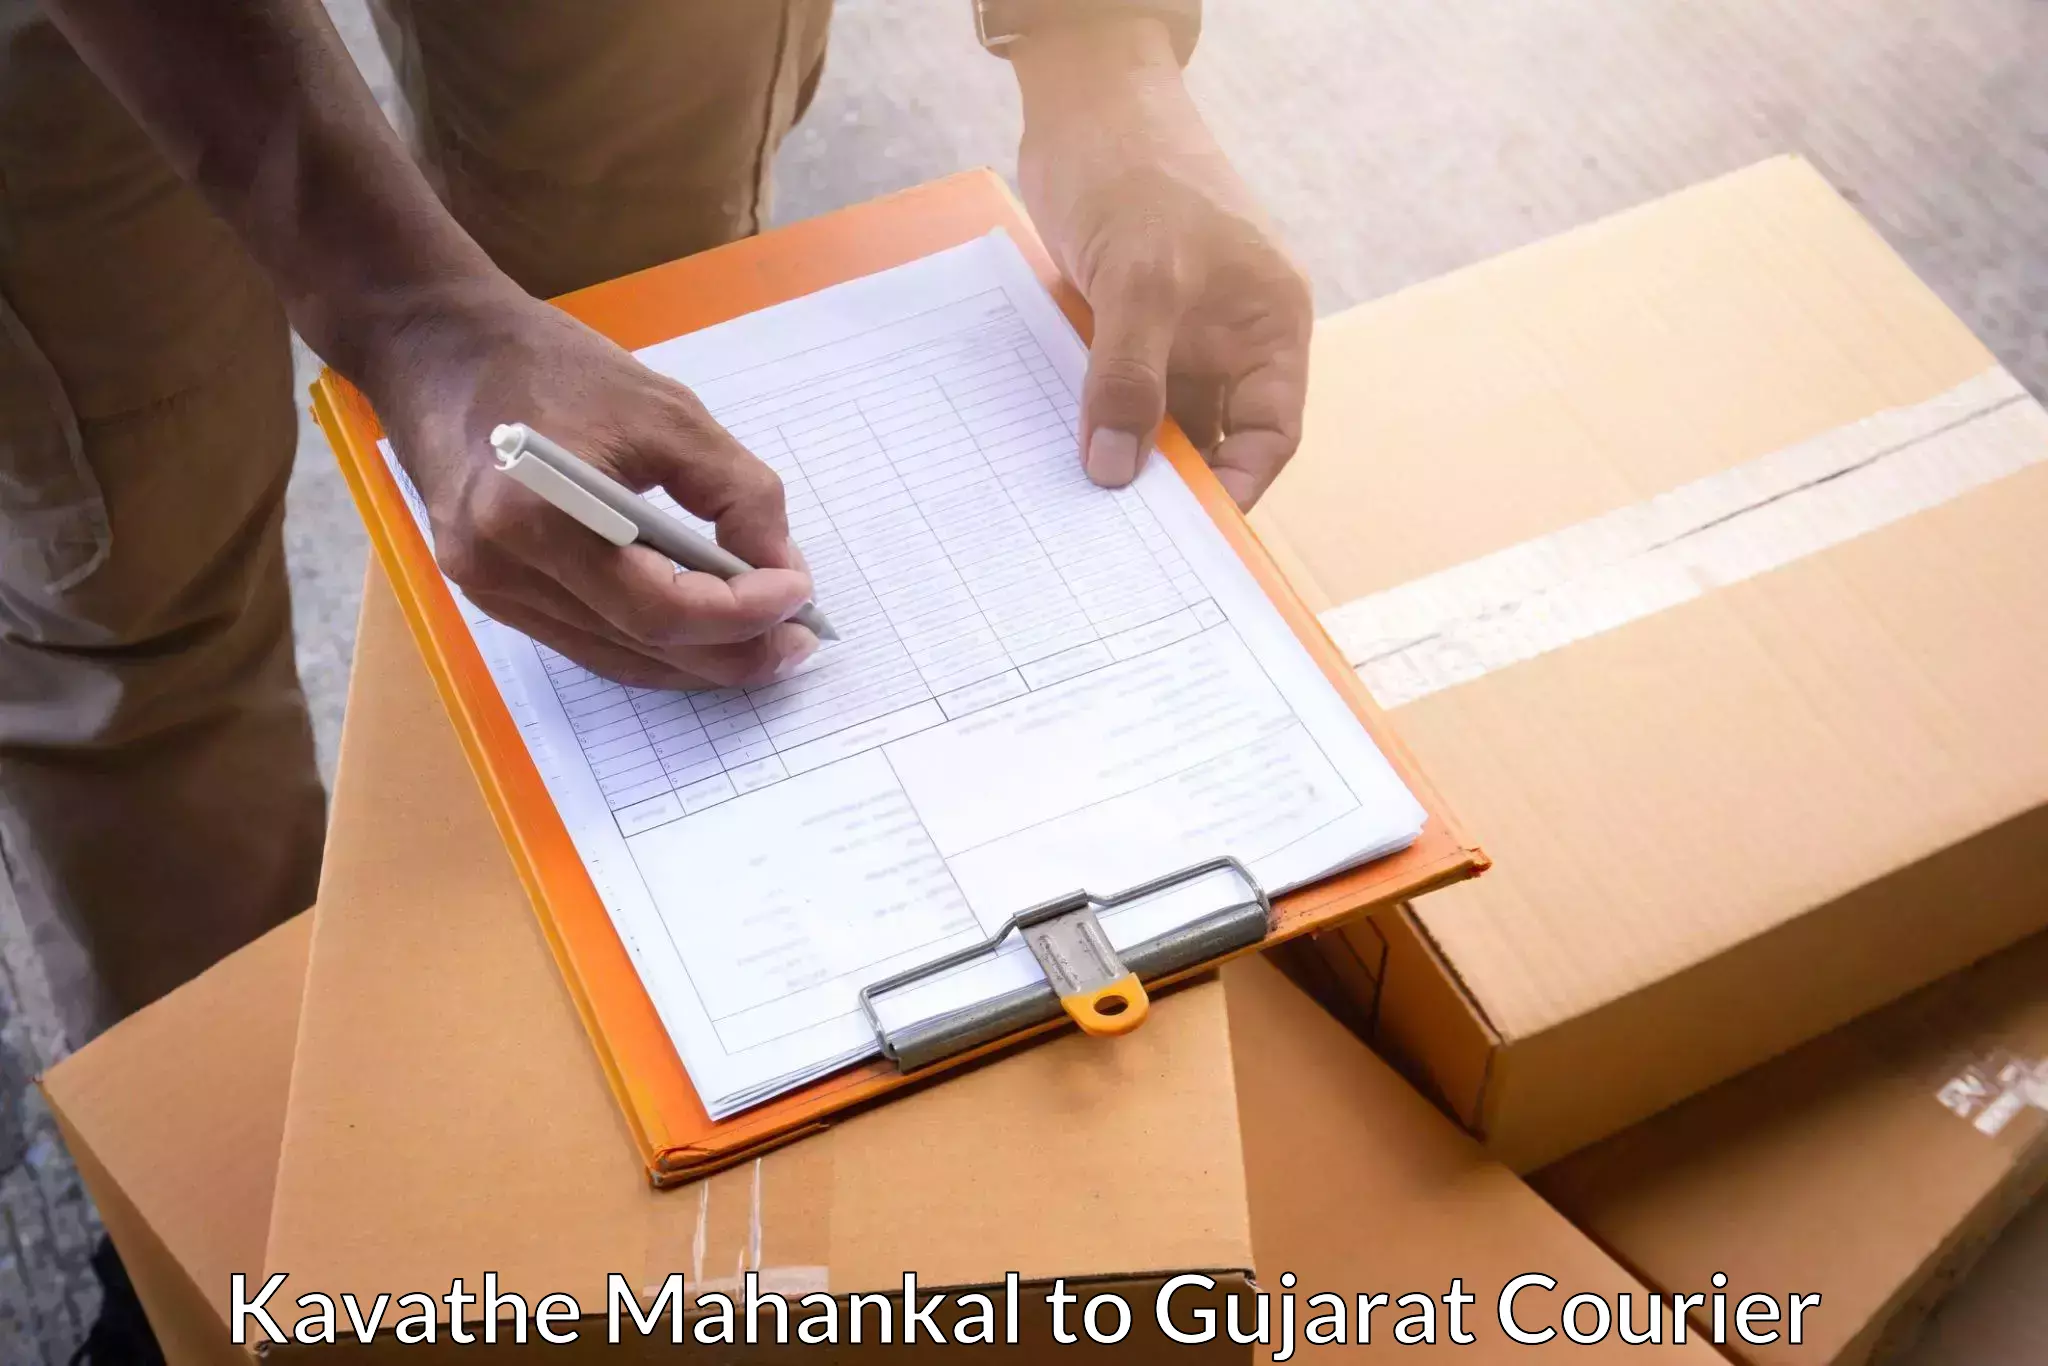 Corporate courier solutions Kavathe Mahankal to Ahmedabad